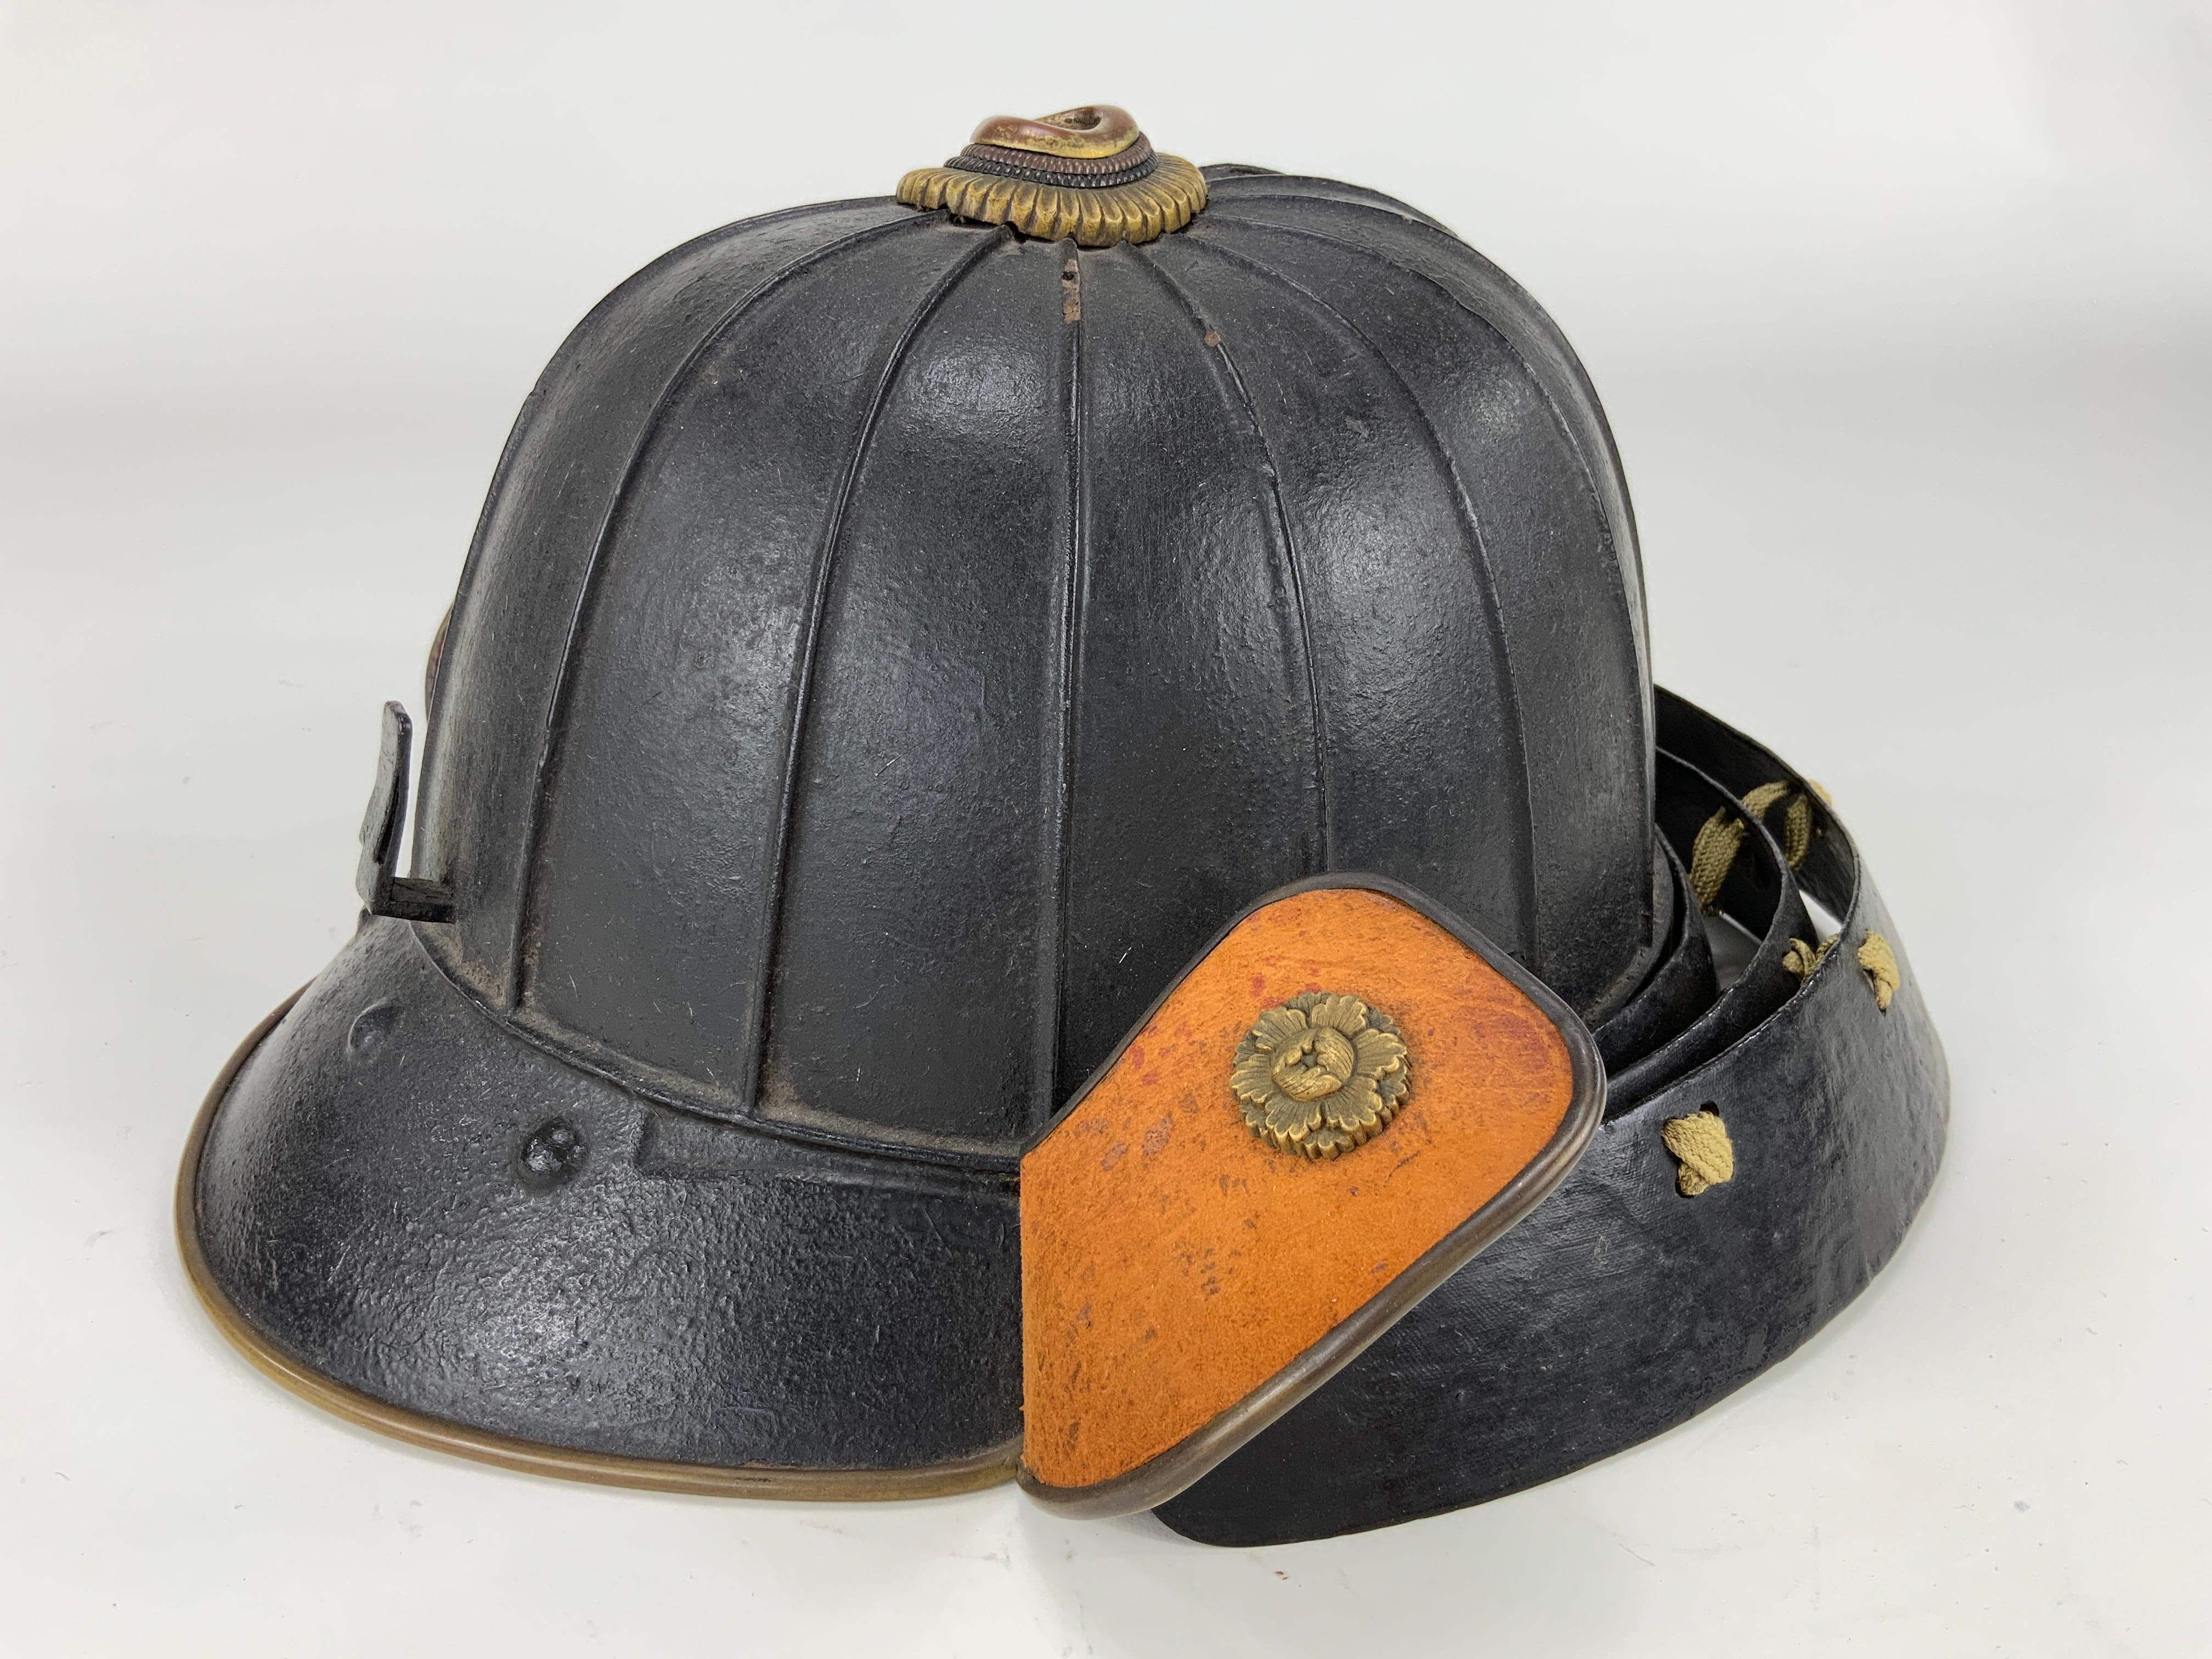 A Japanese Samurai black-lacquered helmet (kabuto) in suji bachi style and of a  goshozan shape consisting of the:

- main dome (hachi) made from 16 plates in natural iron riveted together,
- neck guard (shikoro) made from 3 separate round-shaped